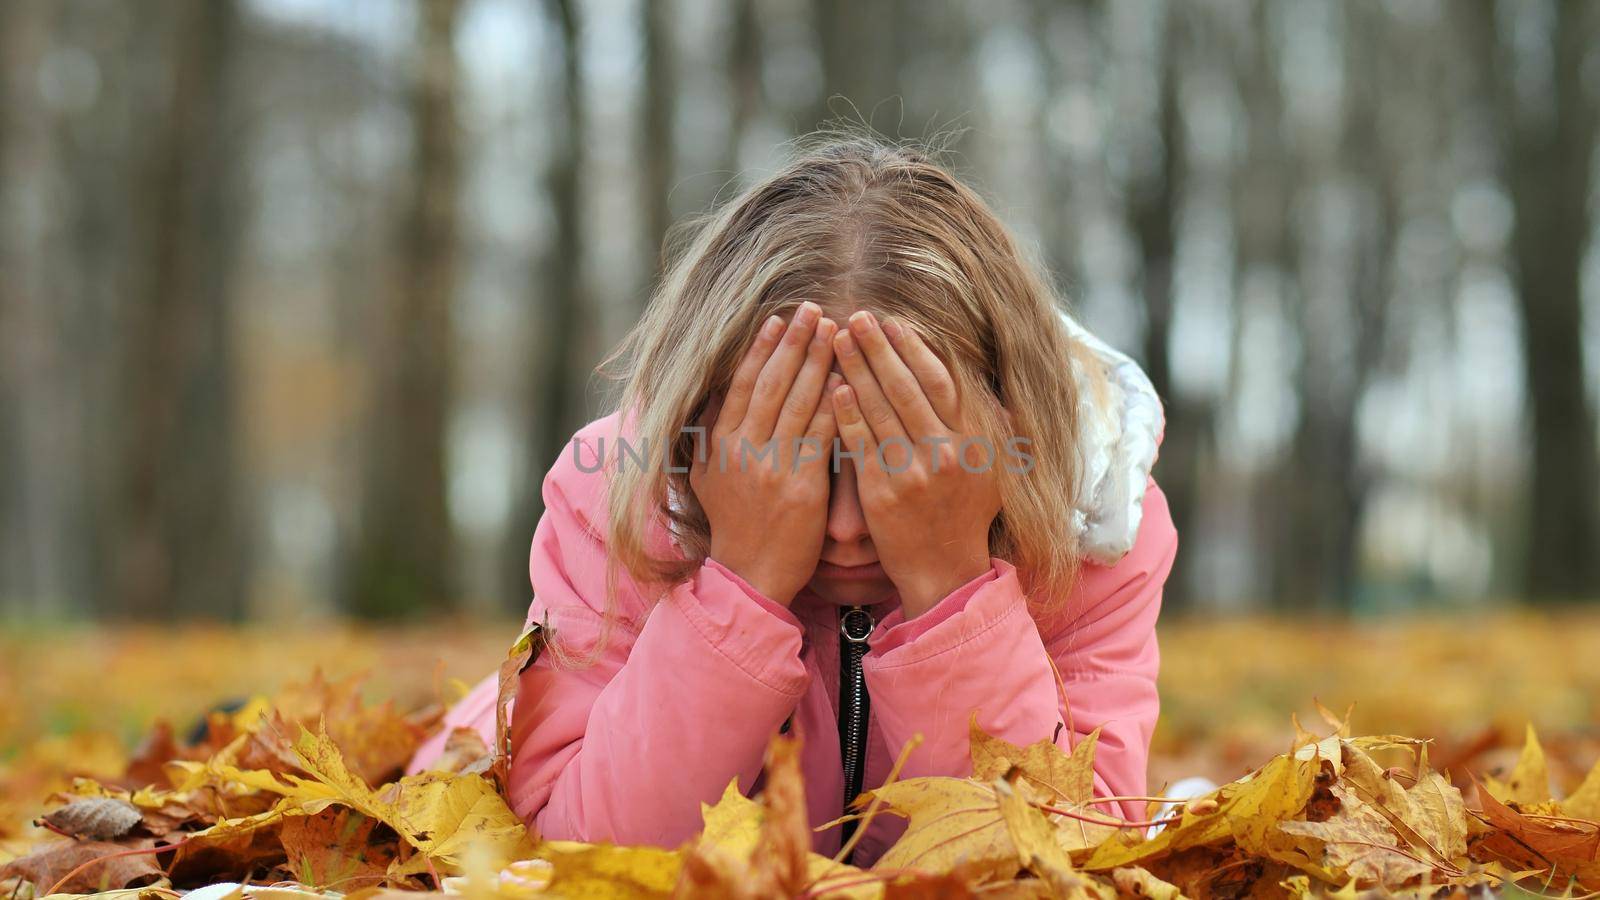 Teenage girl crying in the autumn foliage in the park. by DovidPro